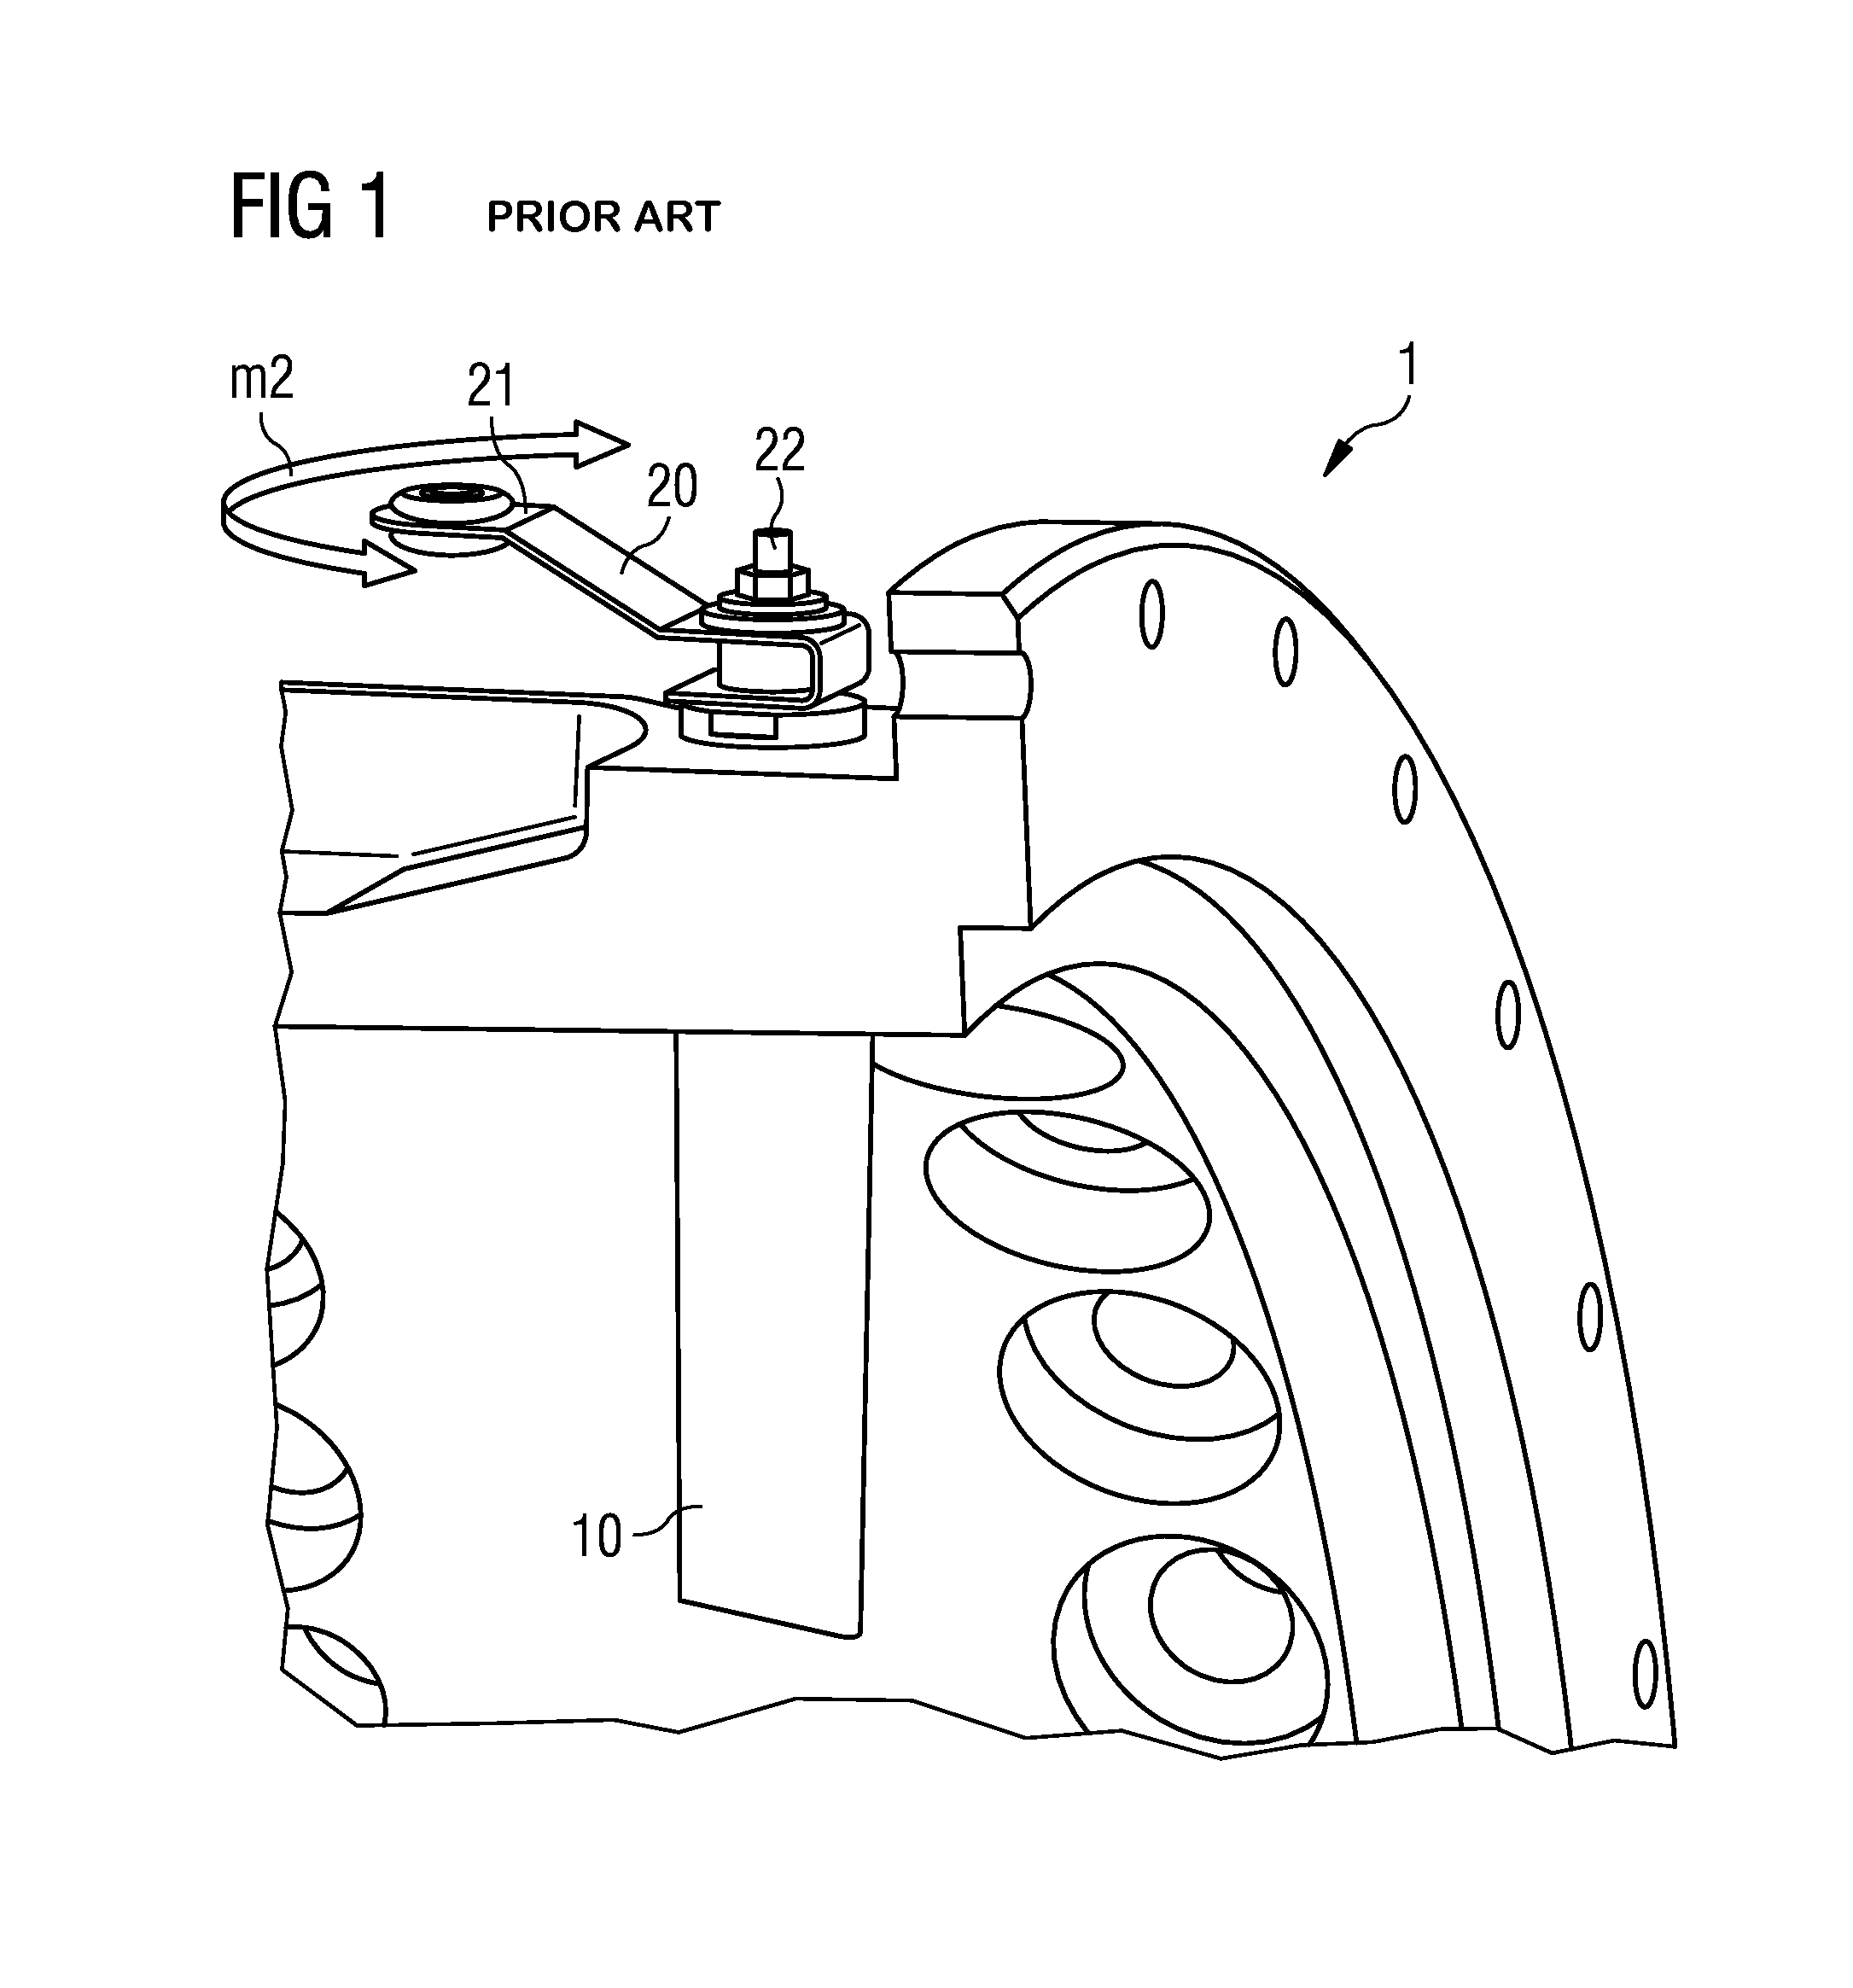 Device for adjusting variable guide vanes